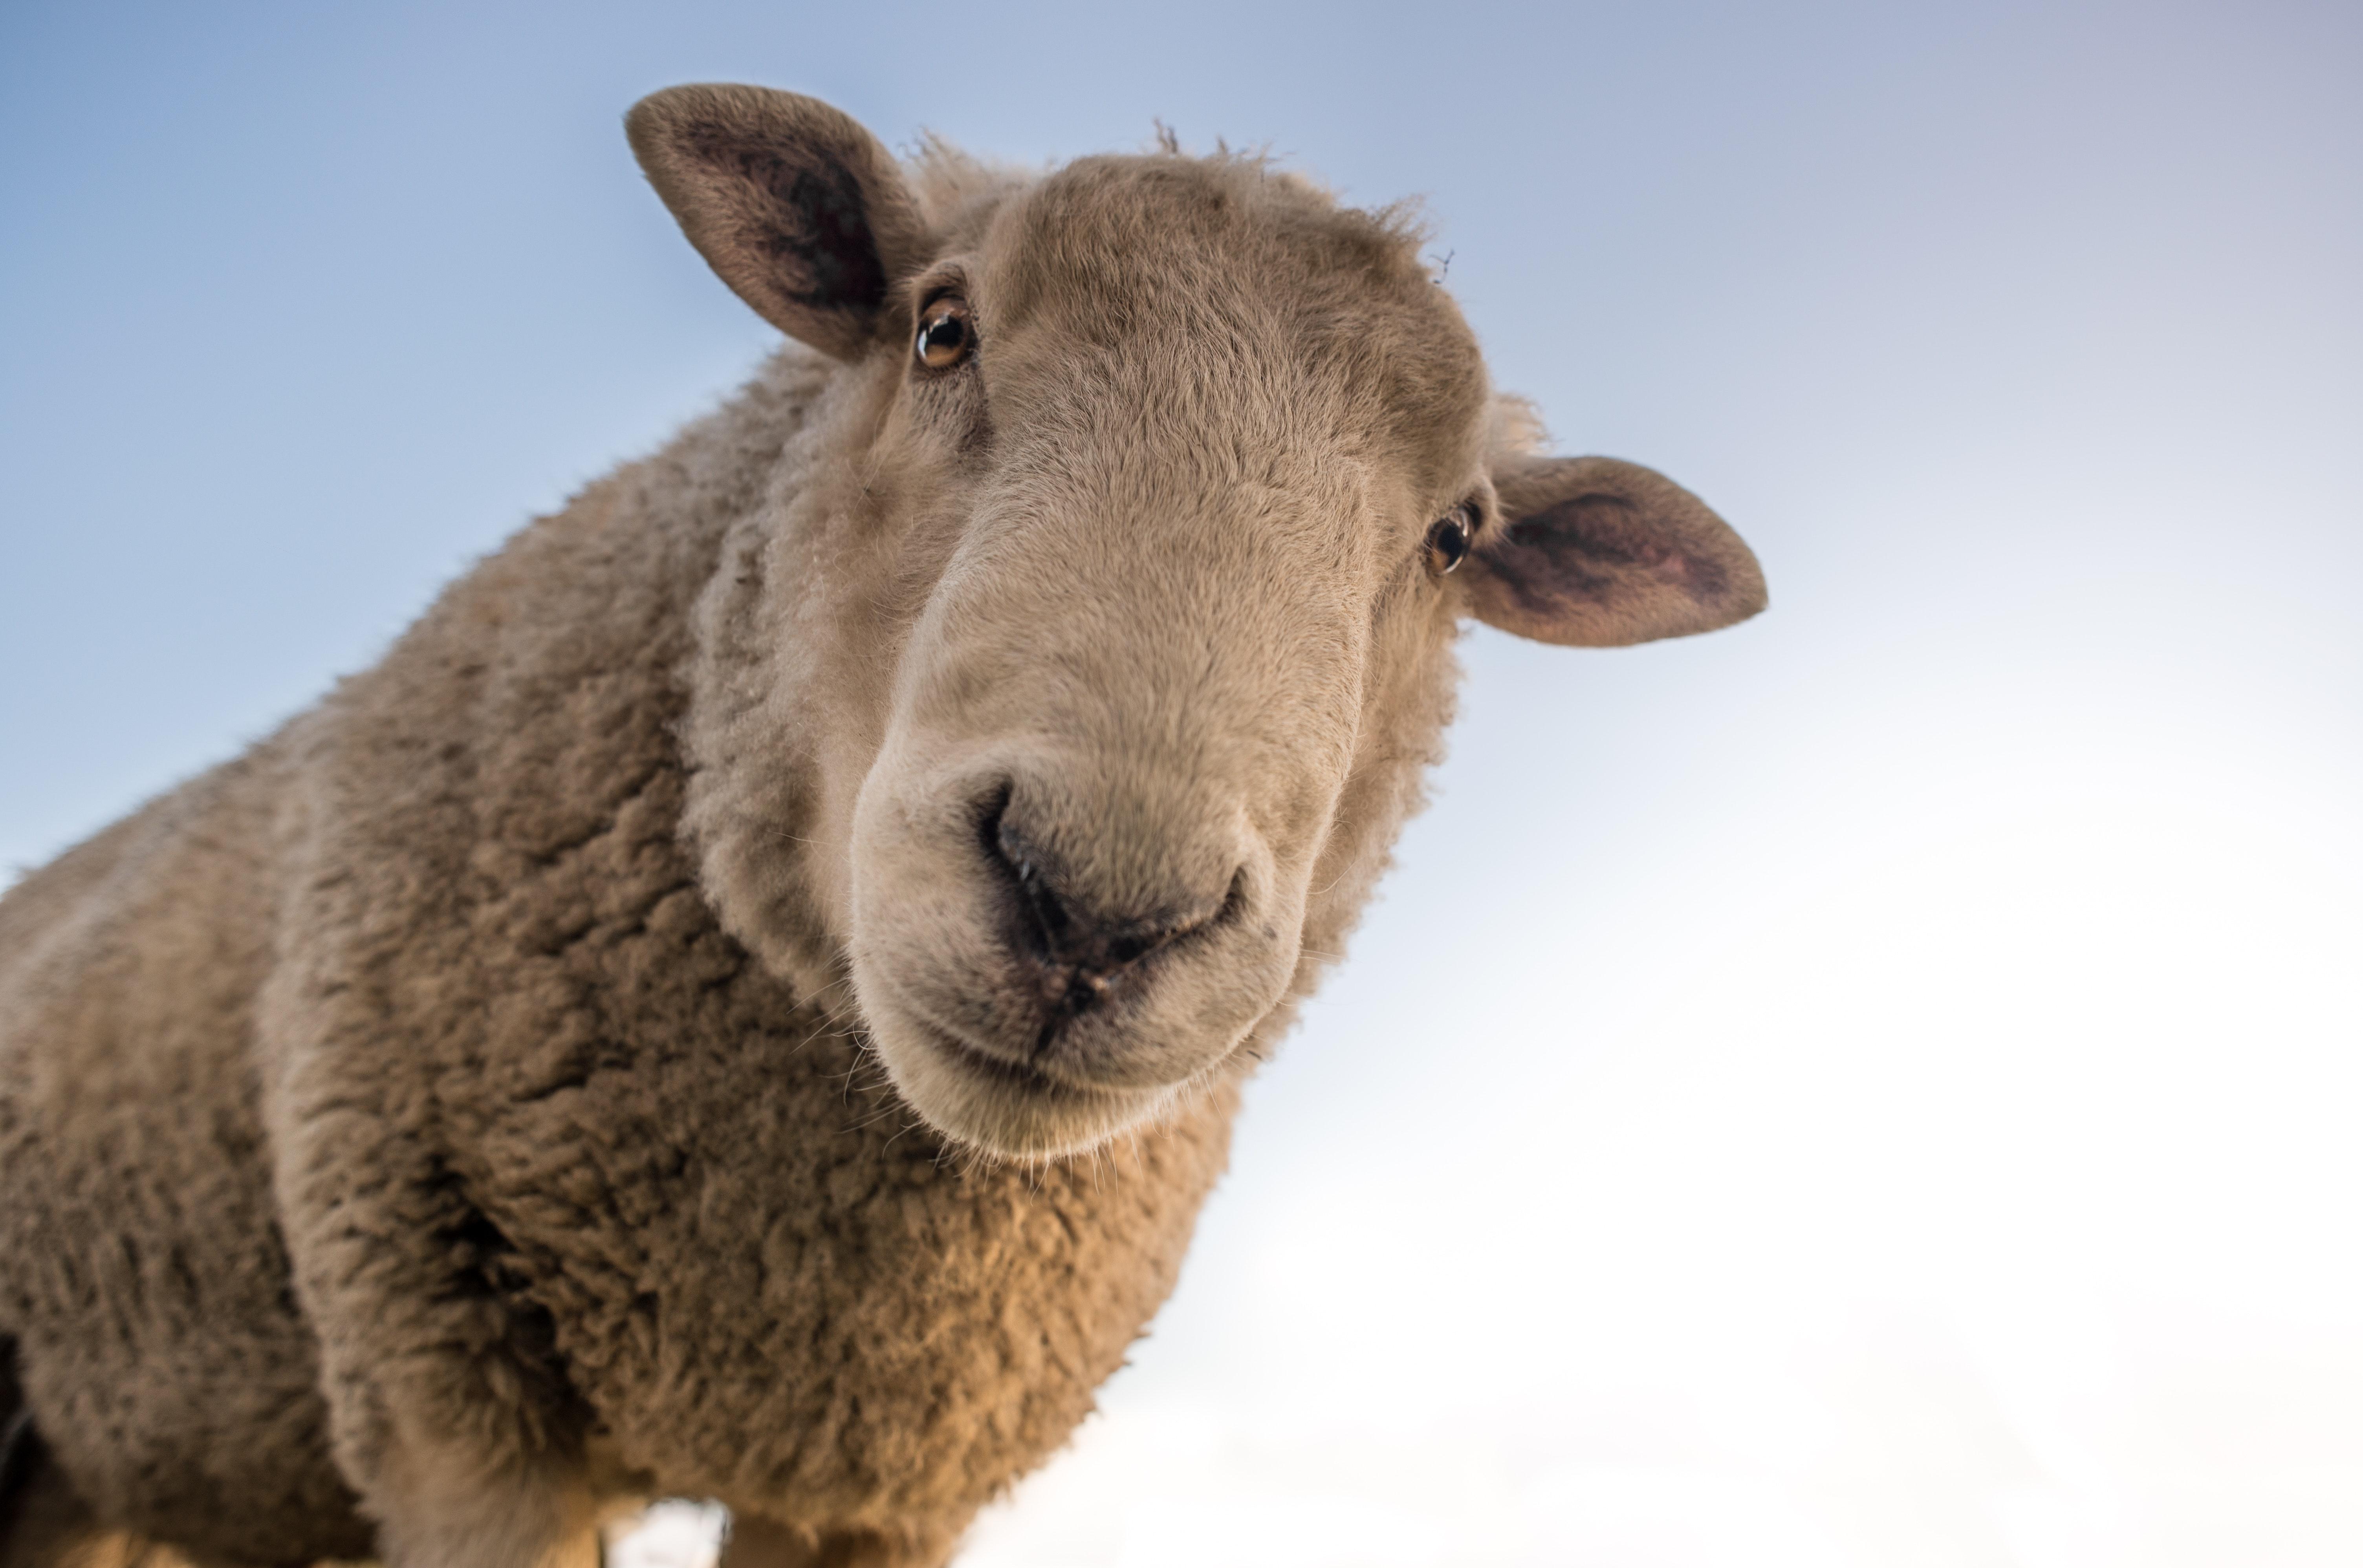 Focus Photo of Brown Sheep Under Blue Sky · Free